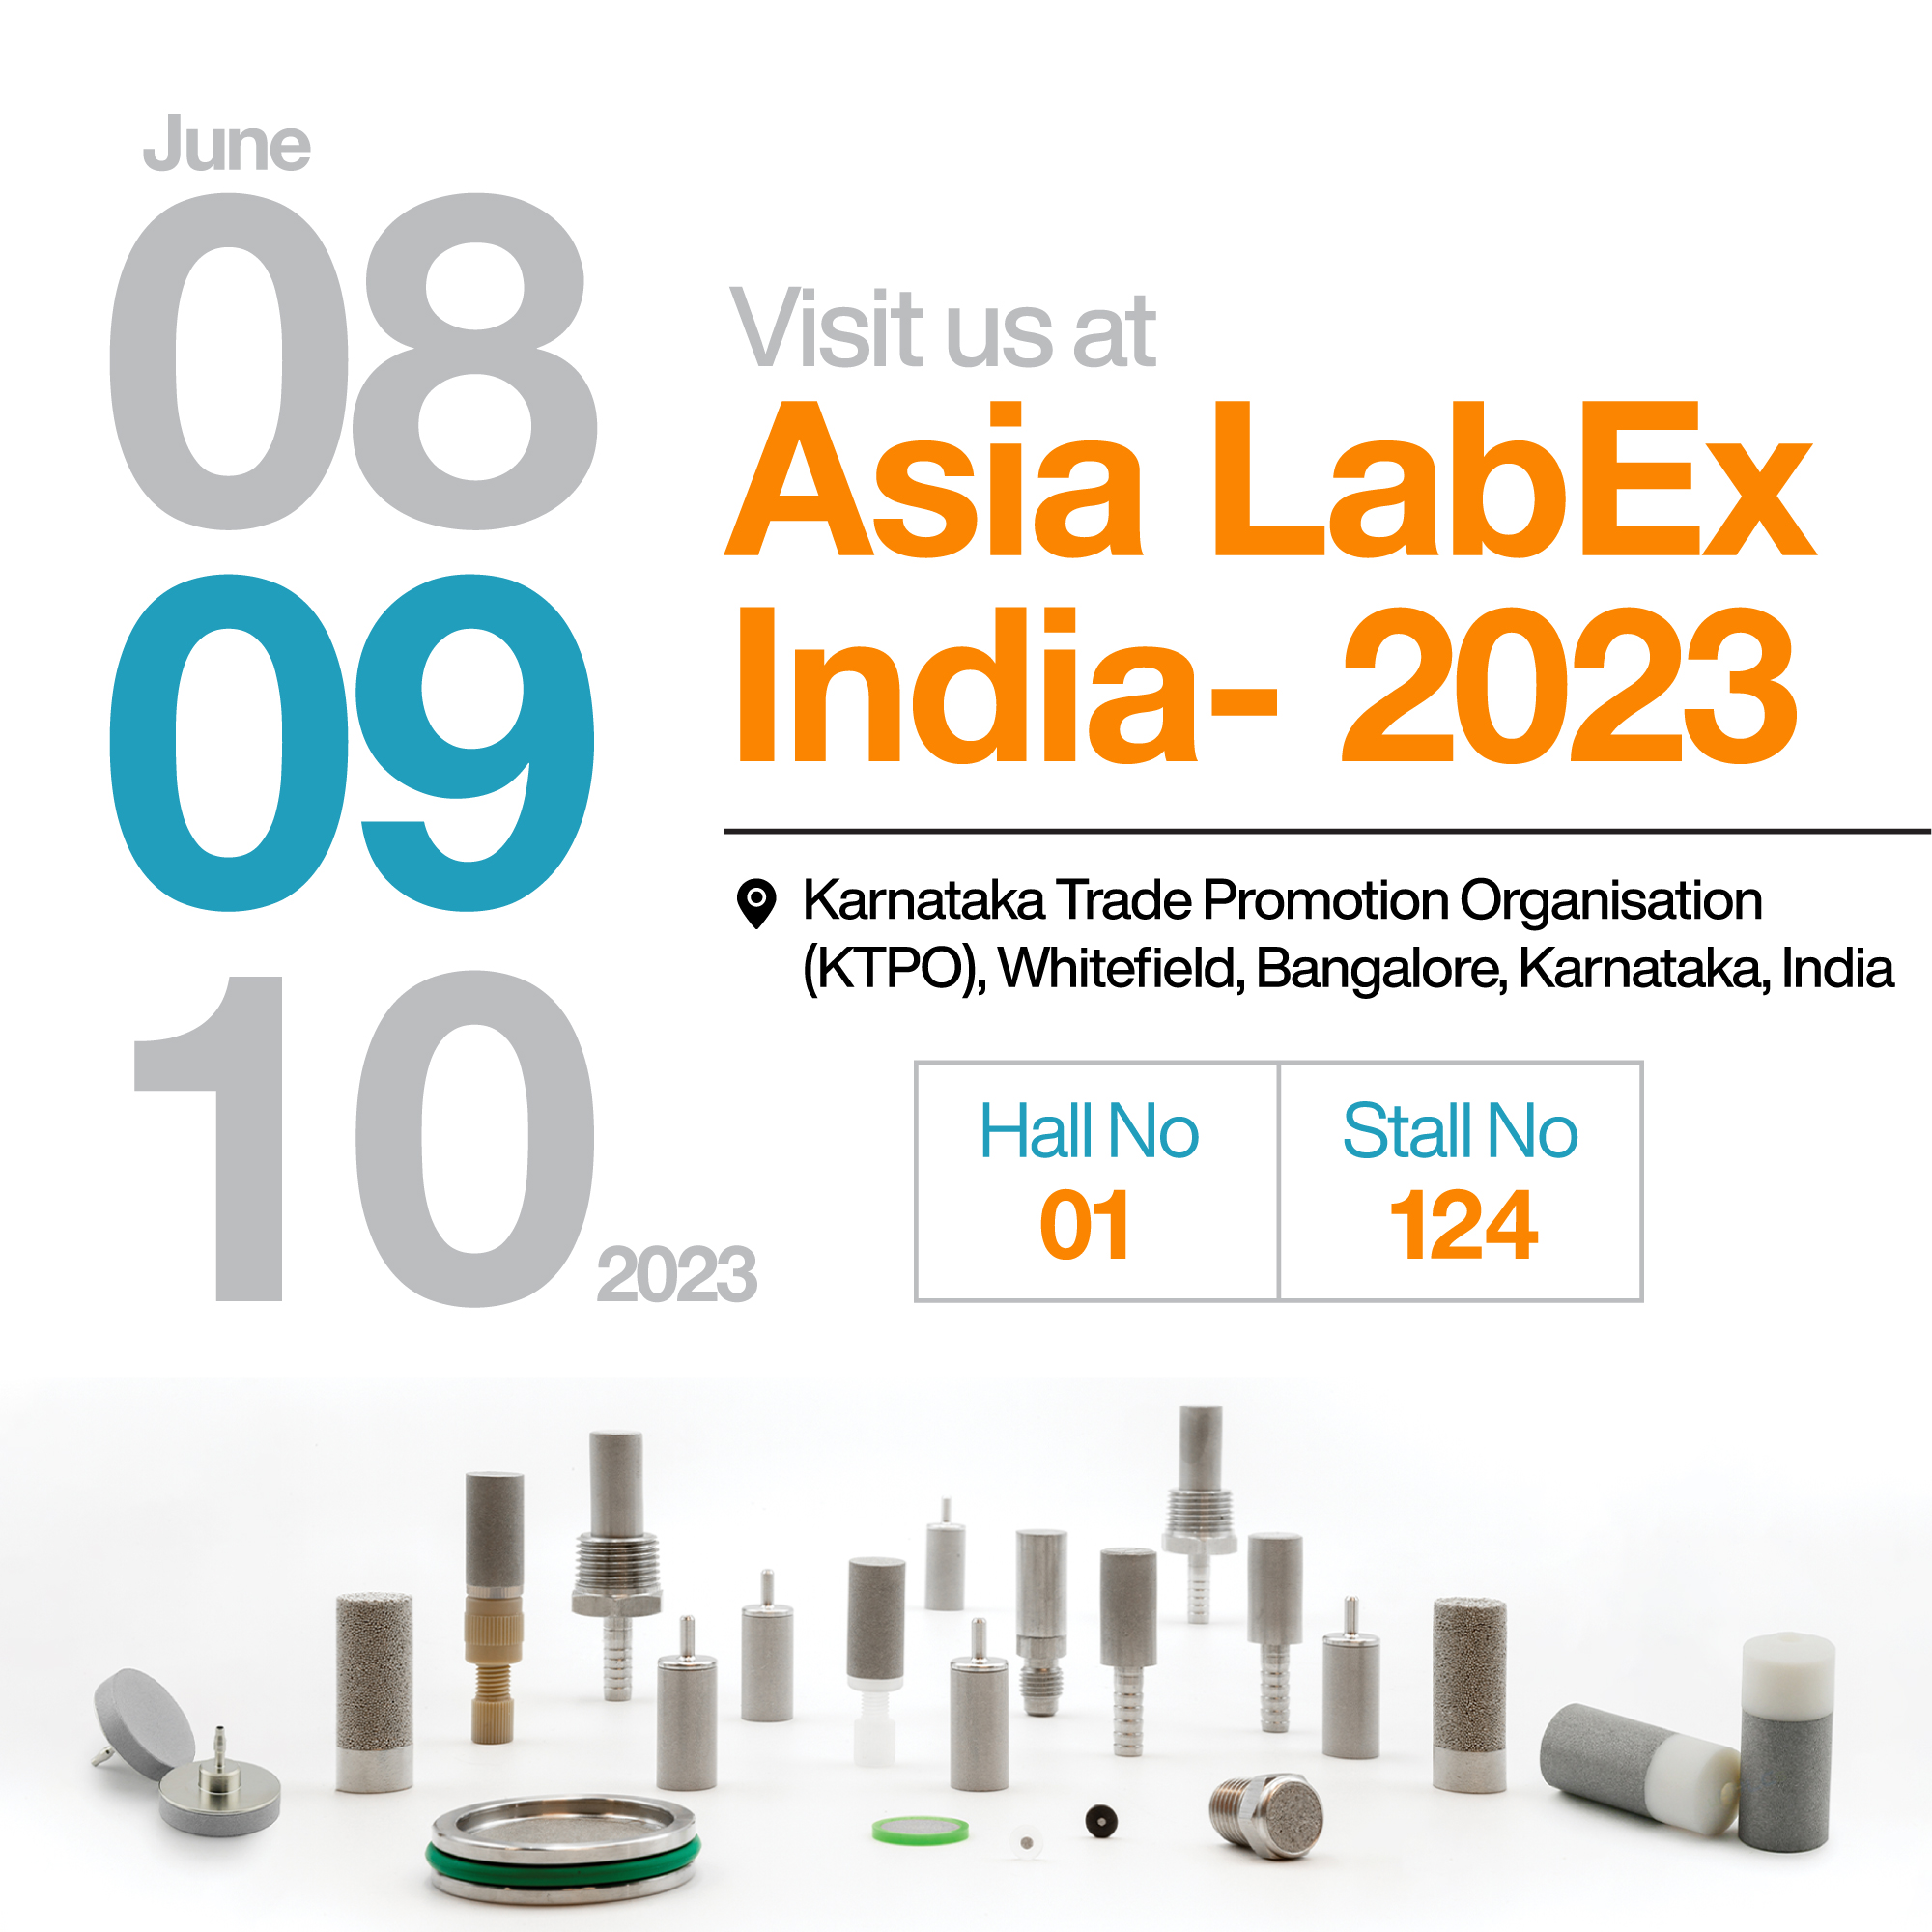 Asia Labex Expo at Bangalore 2023 - Gopani Product Systems